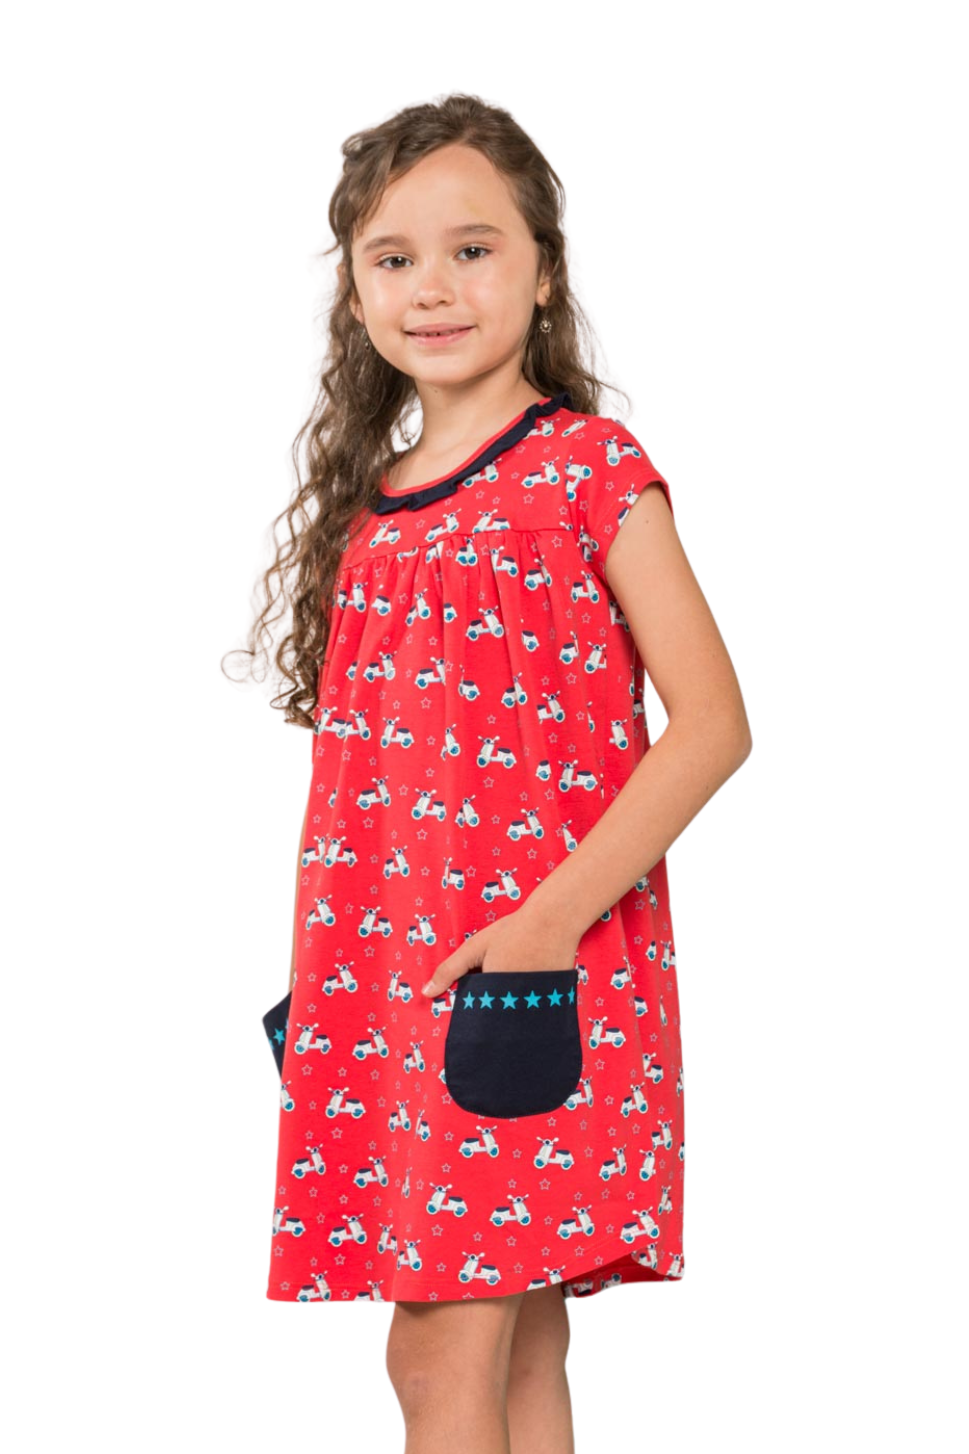 Motorcycle dress for girls, vespa, non-stereotypes dress by prisma kiddos